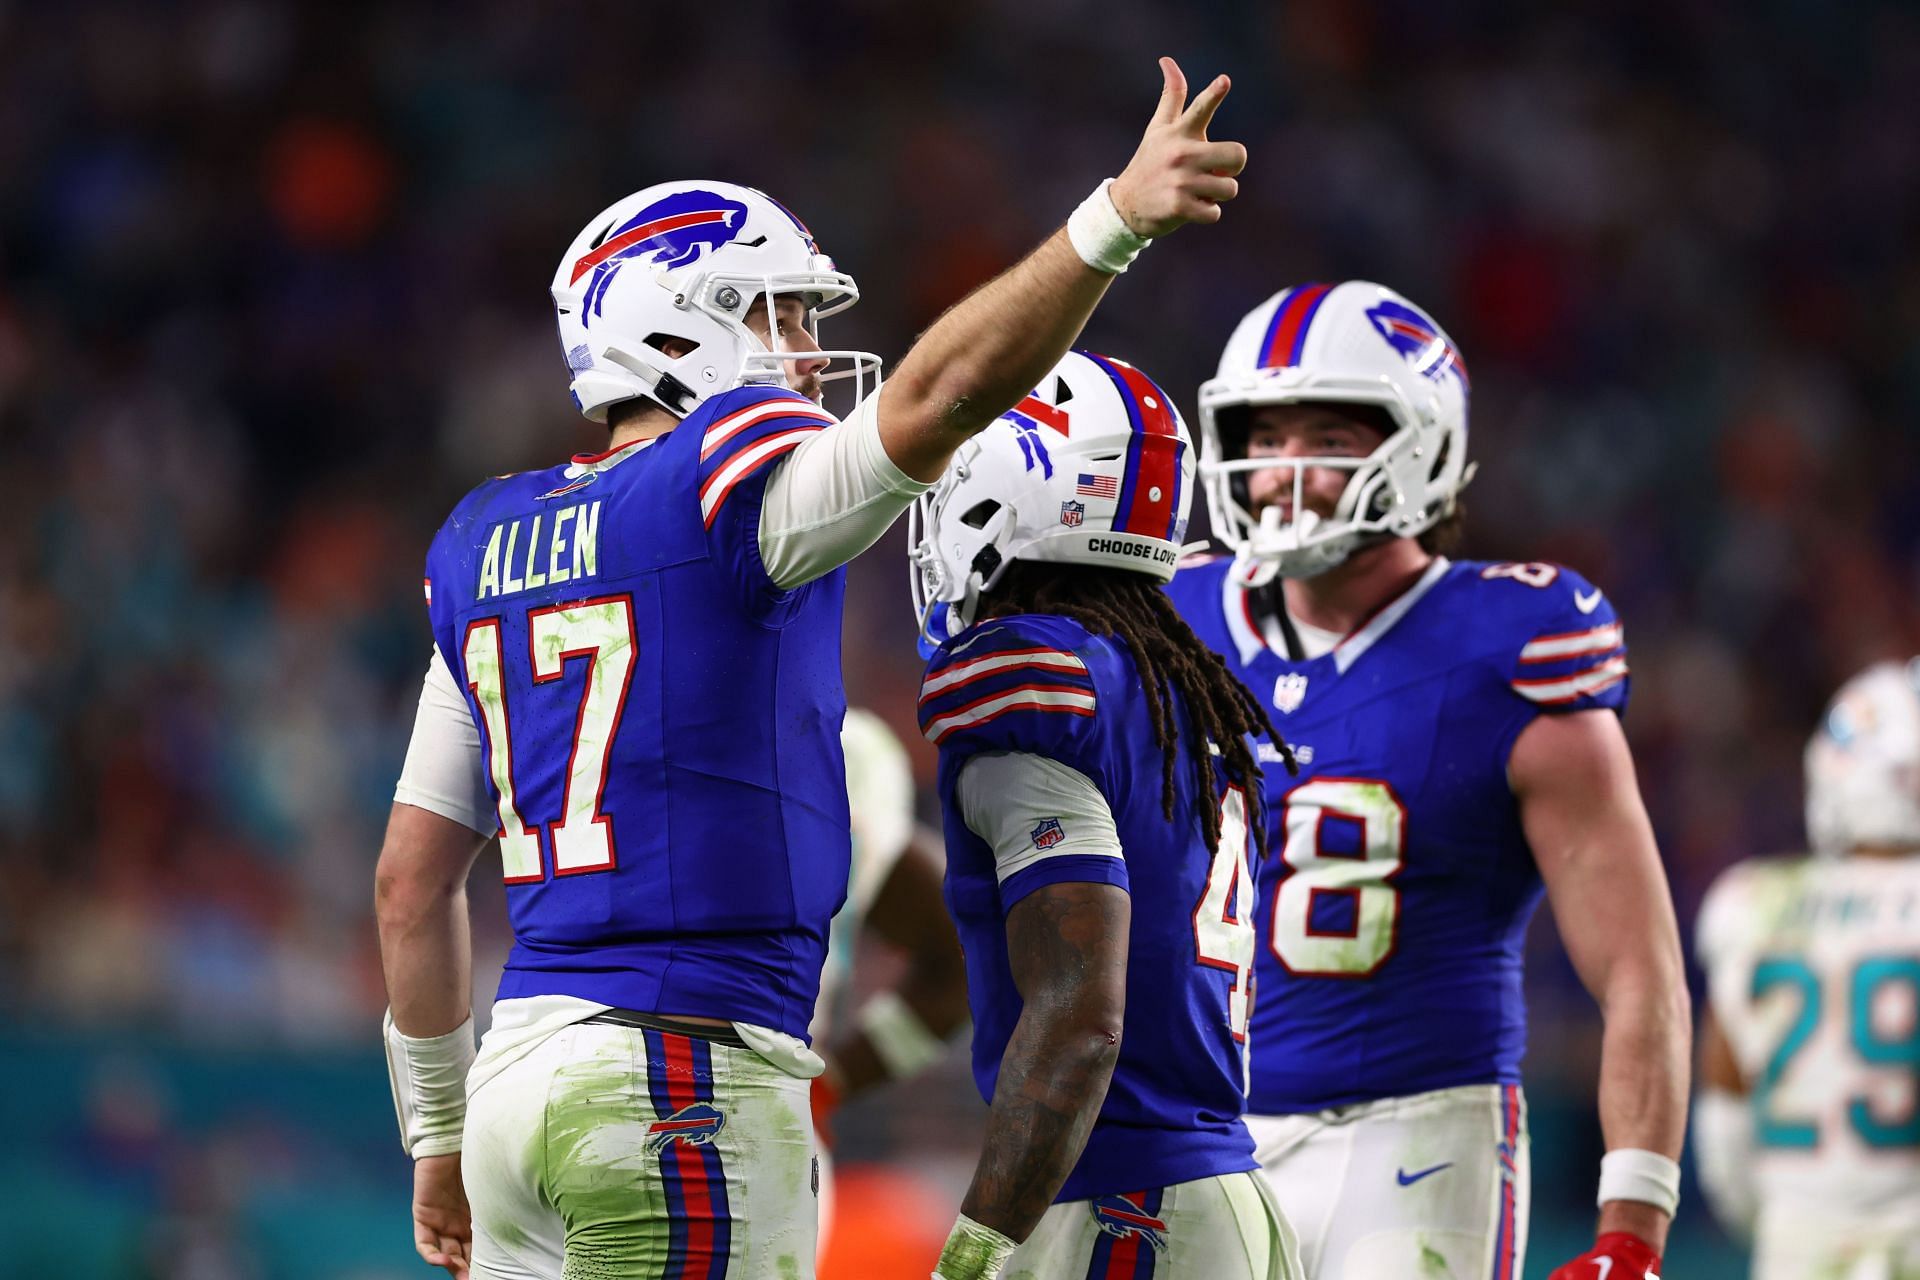 The Buffalo Bills finished as the No. 2 seed in the AFC